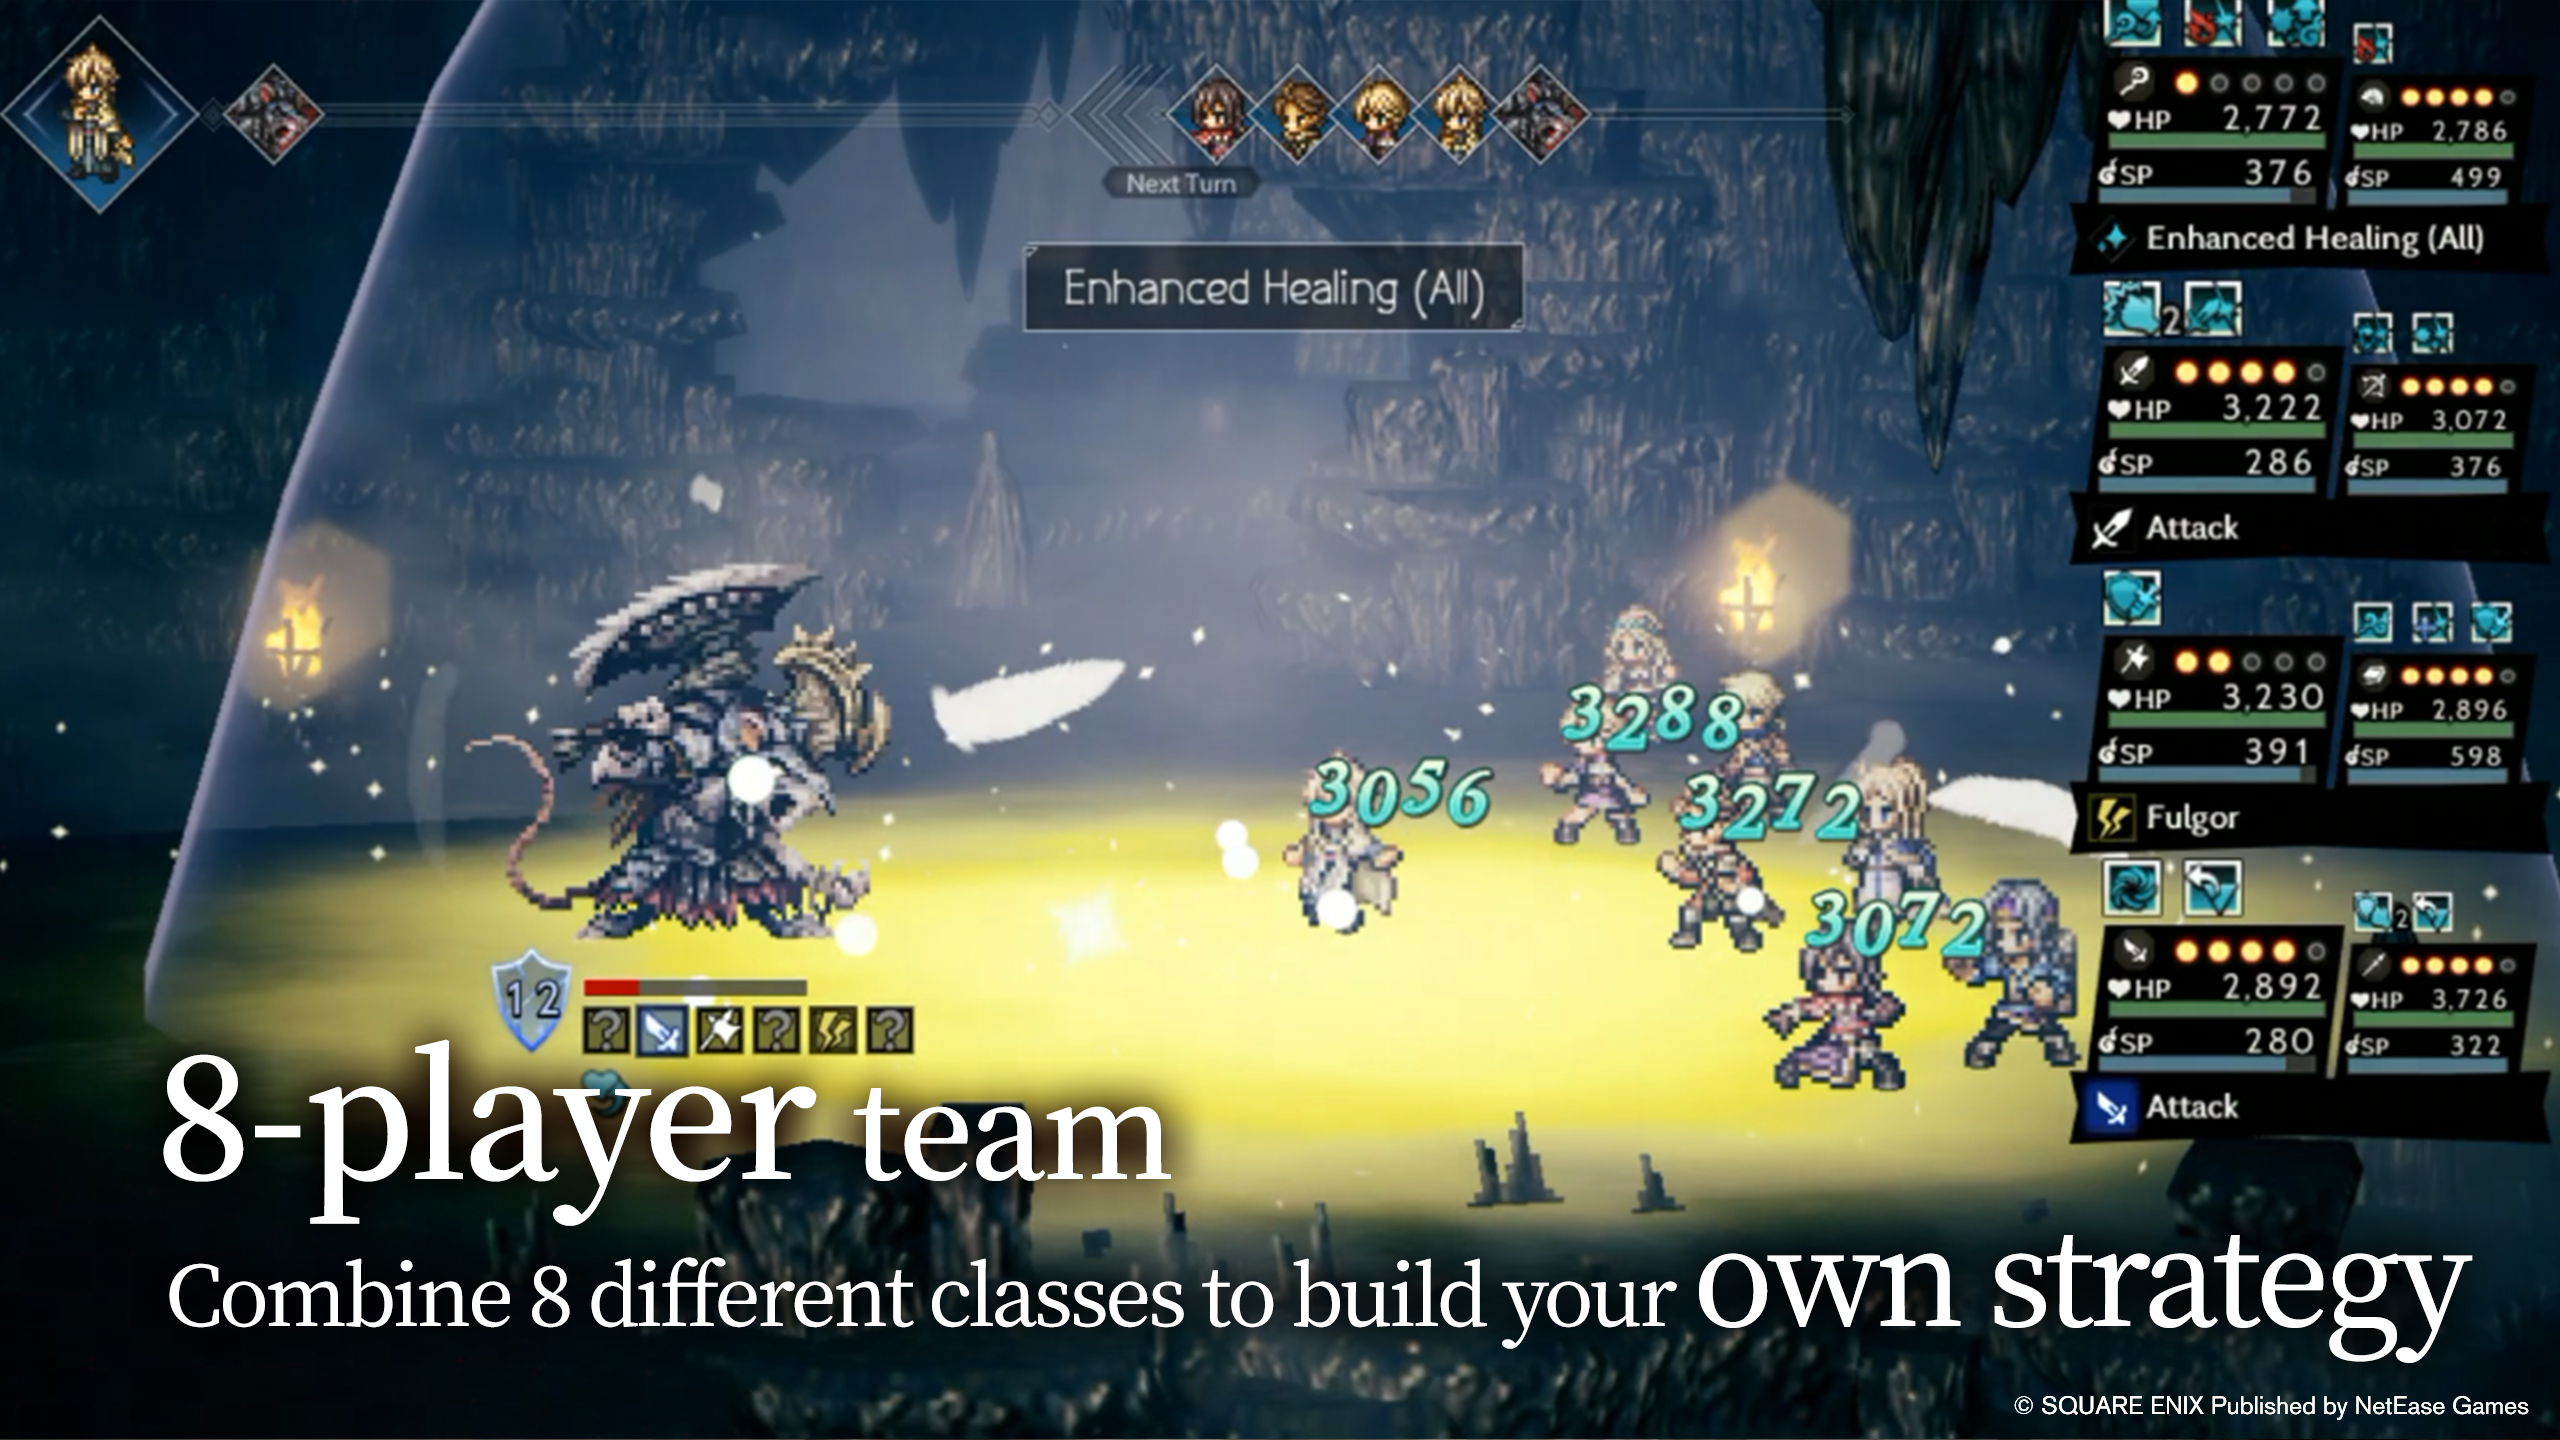 Download & Play OCTOPATH TRAVELER: CotC on PC with NoxPlayer